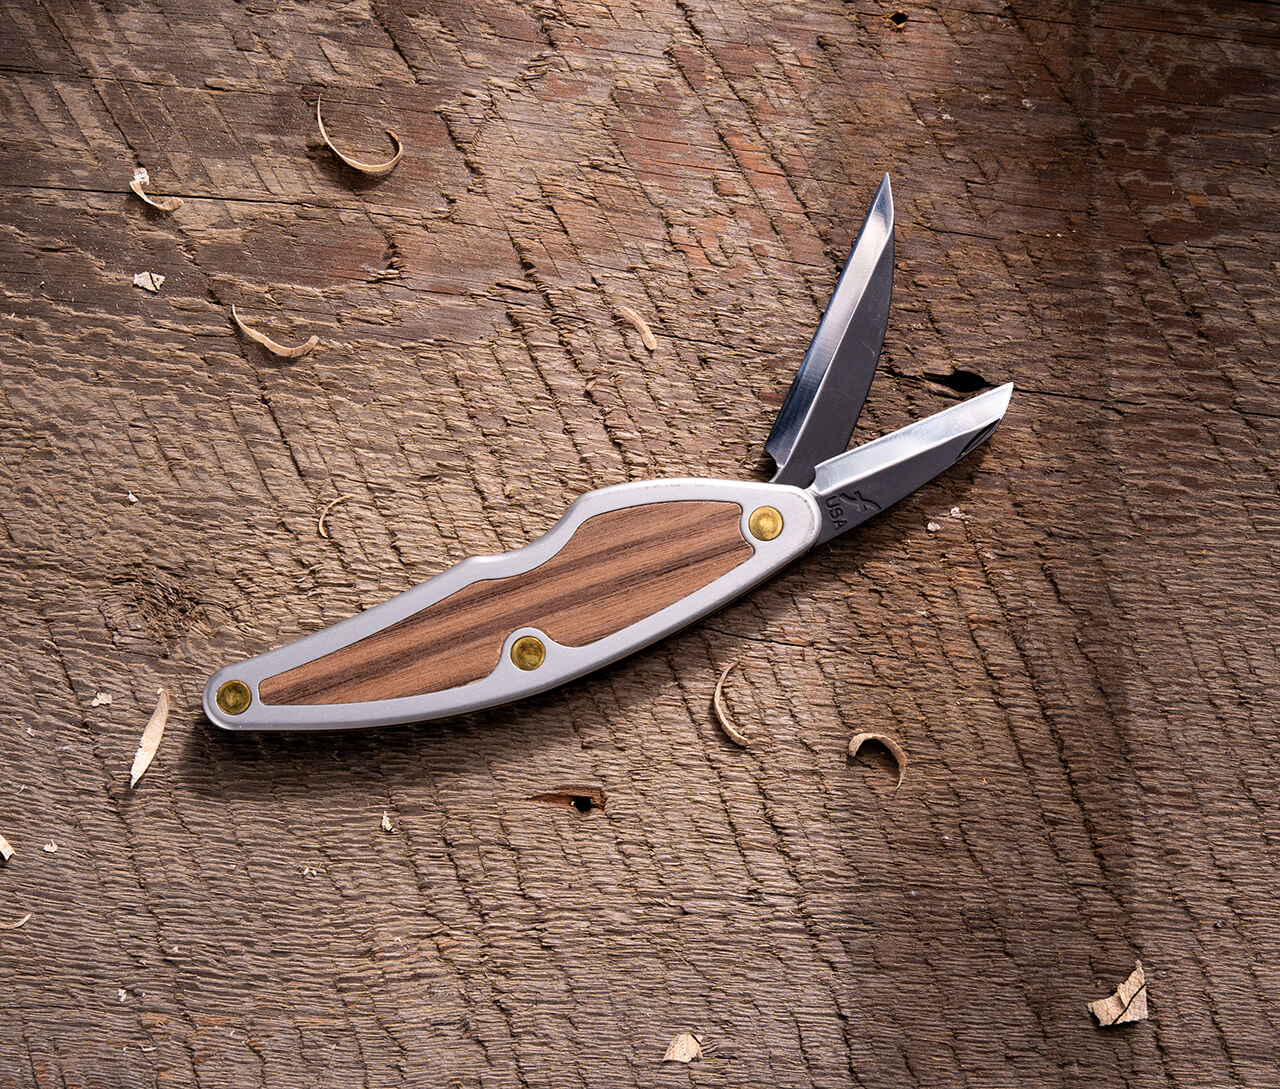 Flexcut Tri-Jack Pro Carving Knife 3 Different Style Blades, Aluminum  Handle w/ Cherry Wood Inlays - KnifeCenter - FLEXJKN95